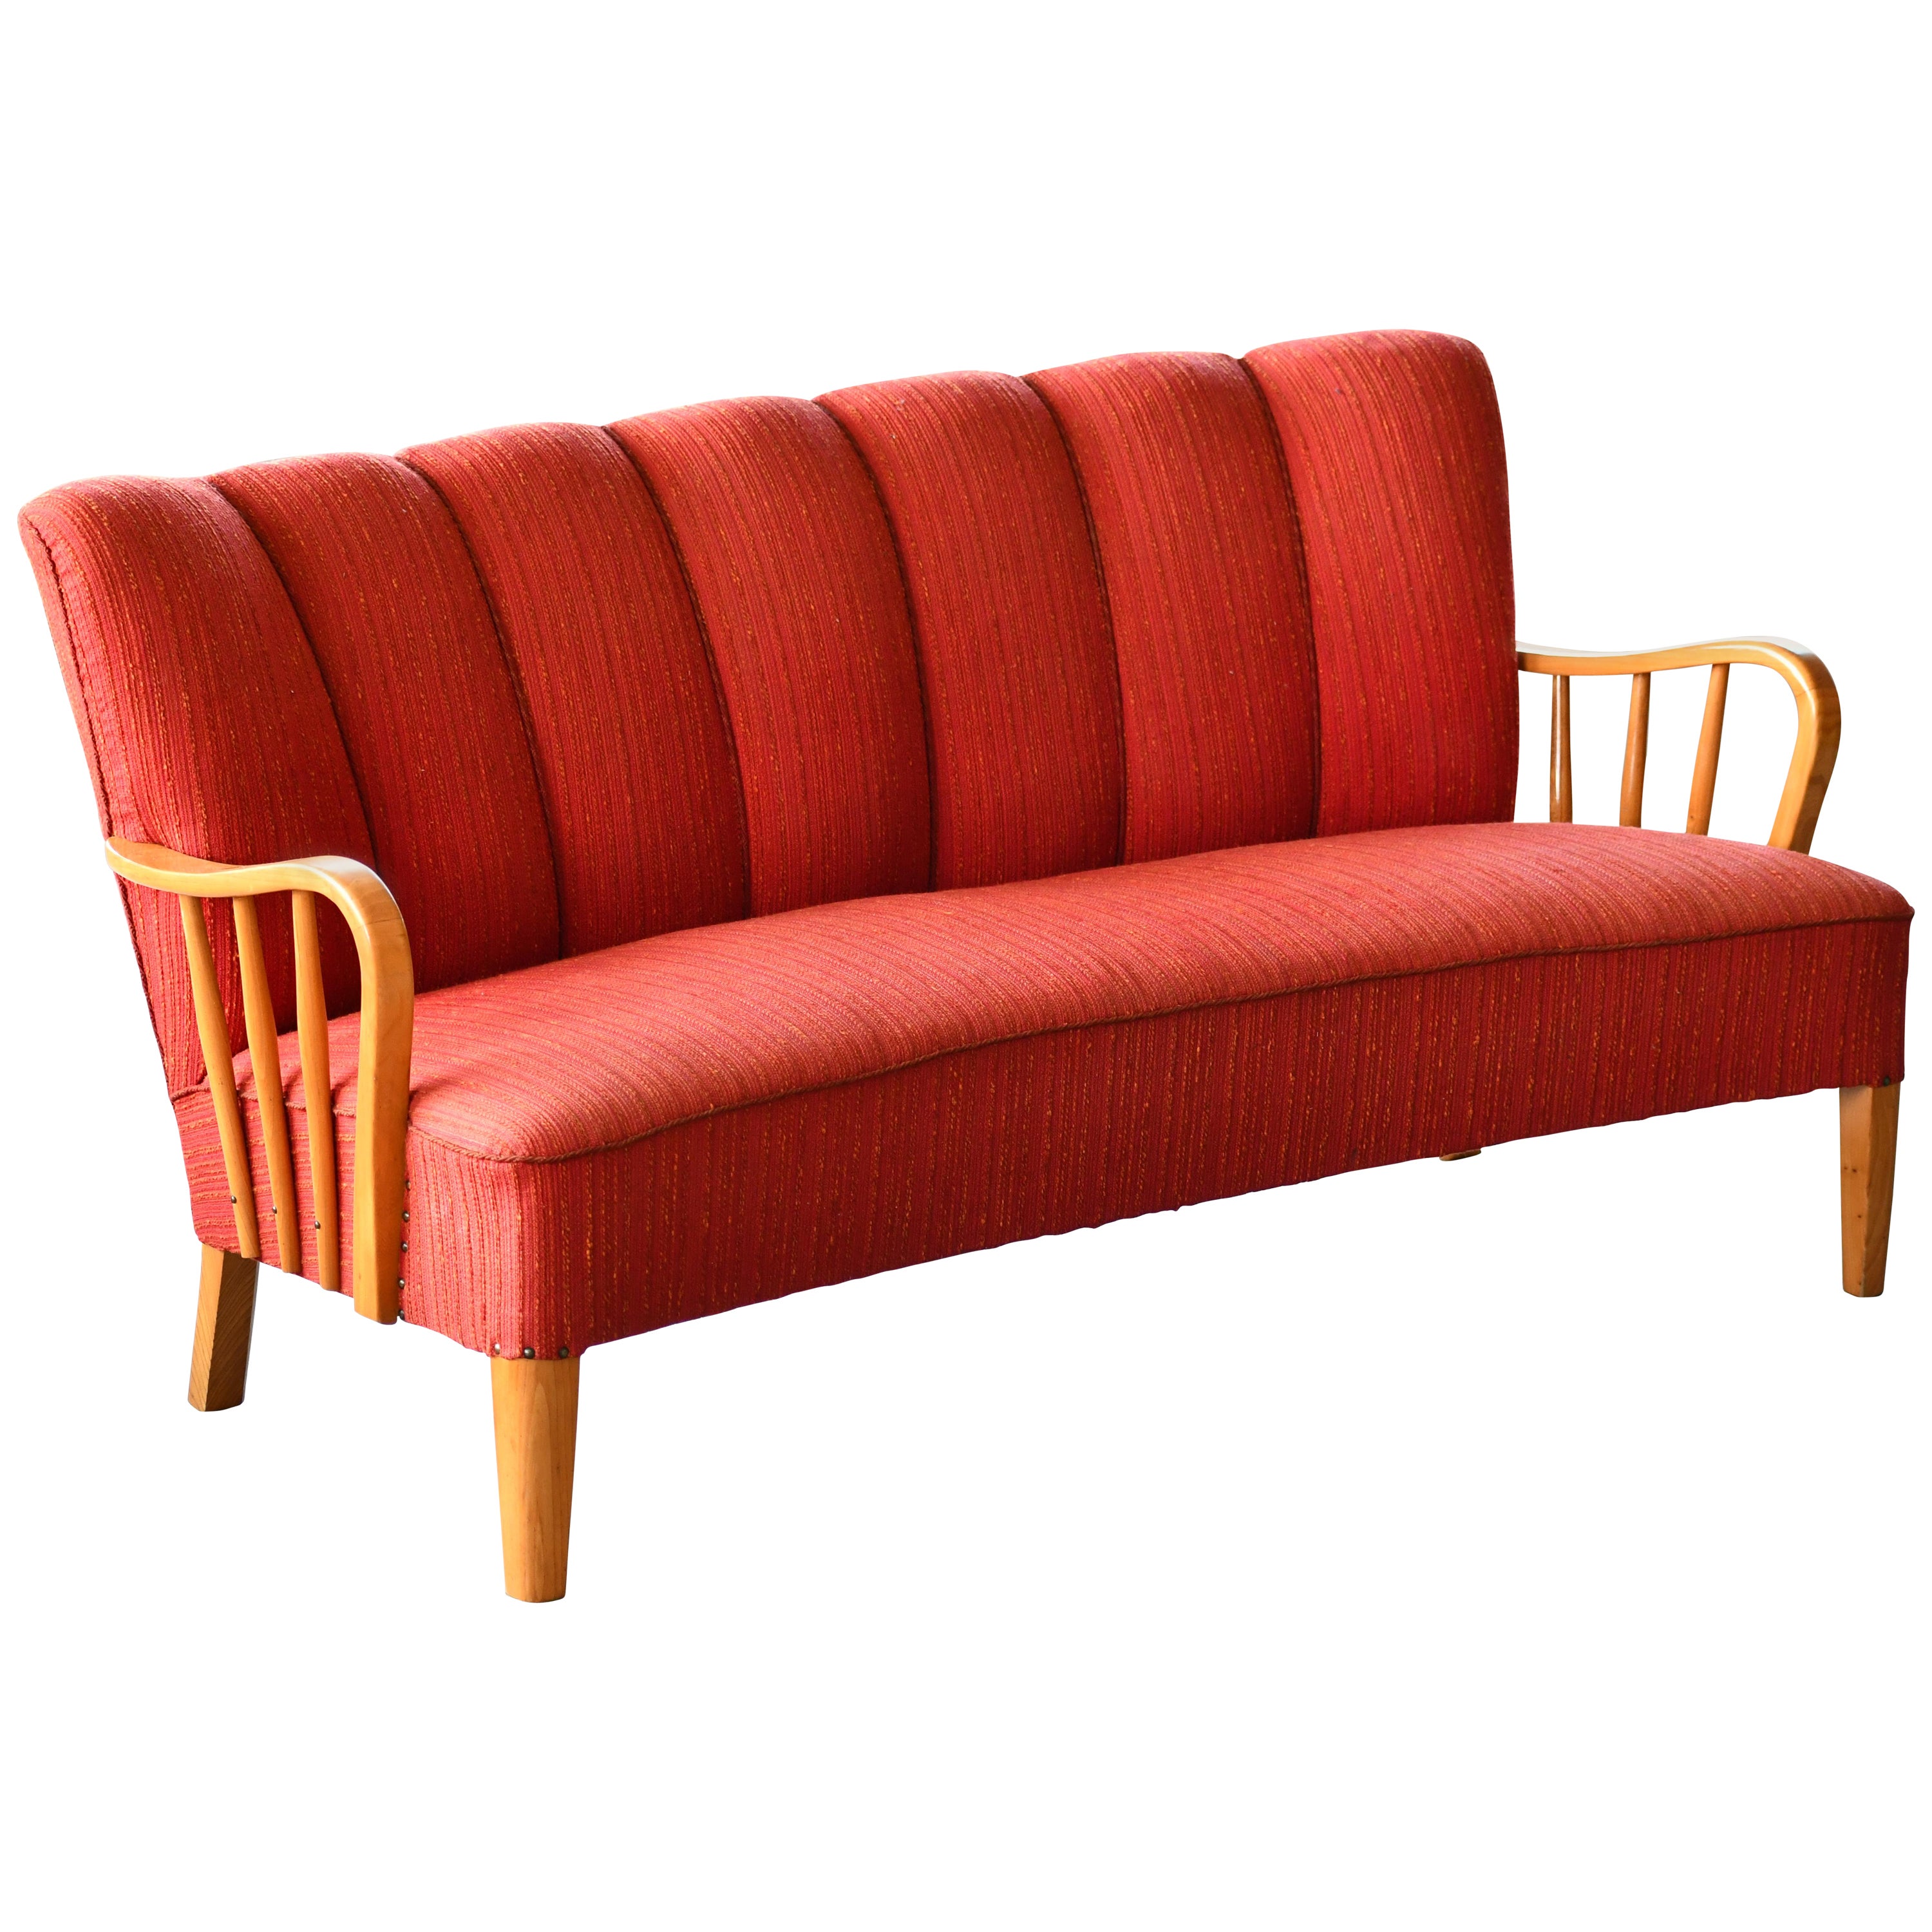 Danish Loveseat or Small Sofa with Open Elmwood Armrests, 1940's For Sale